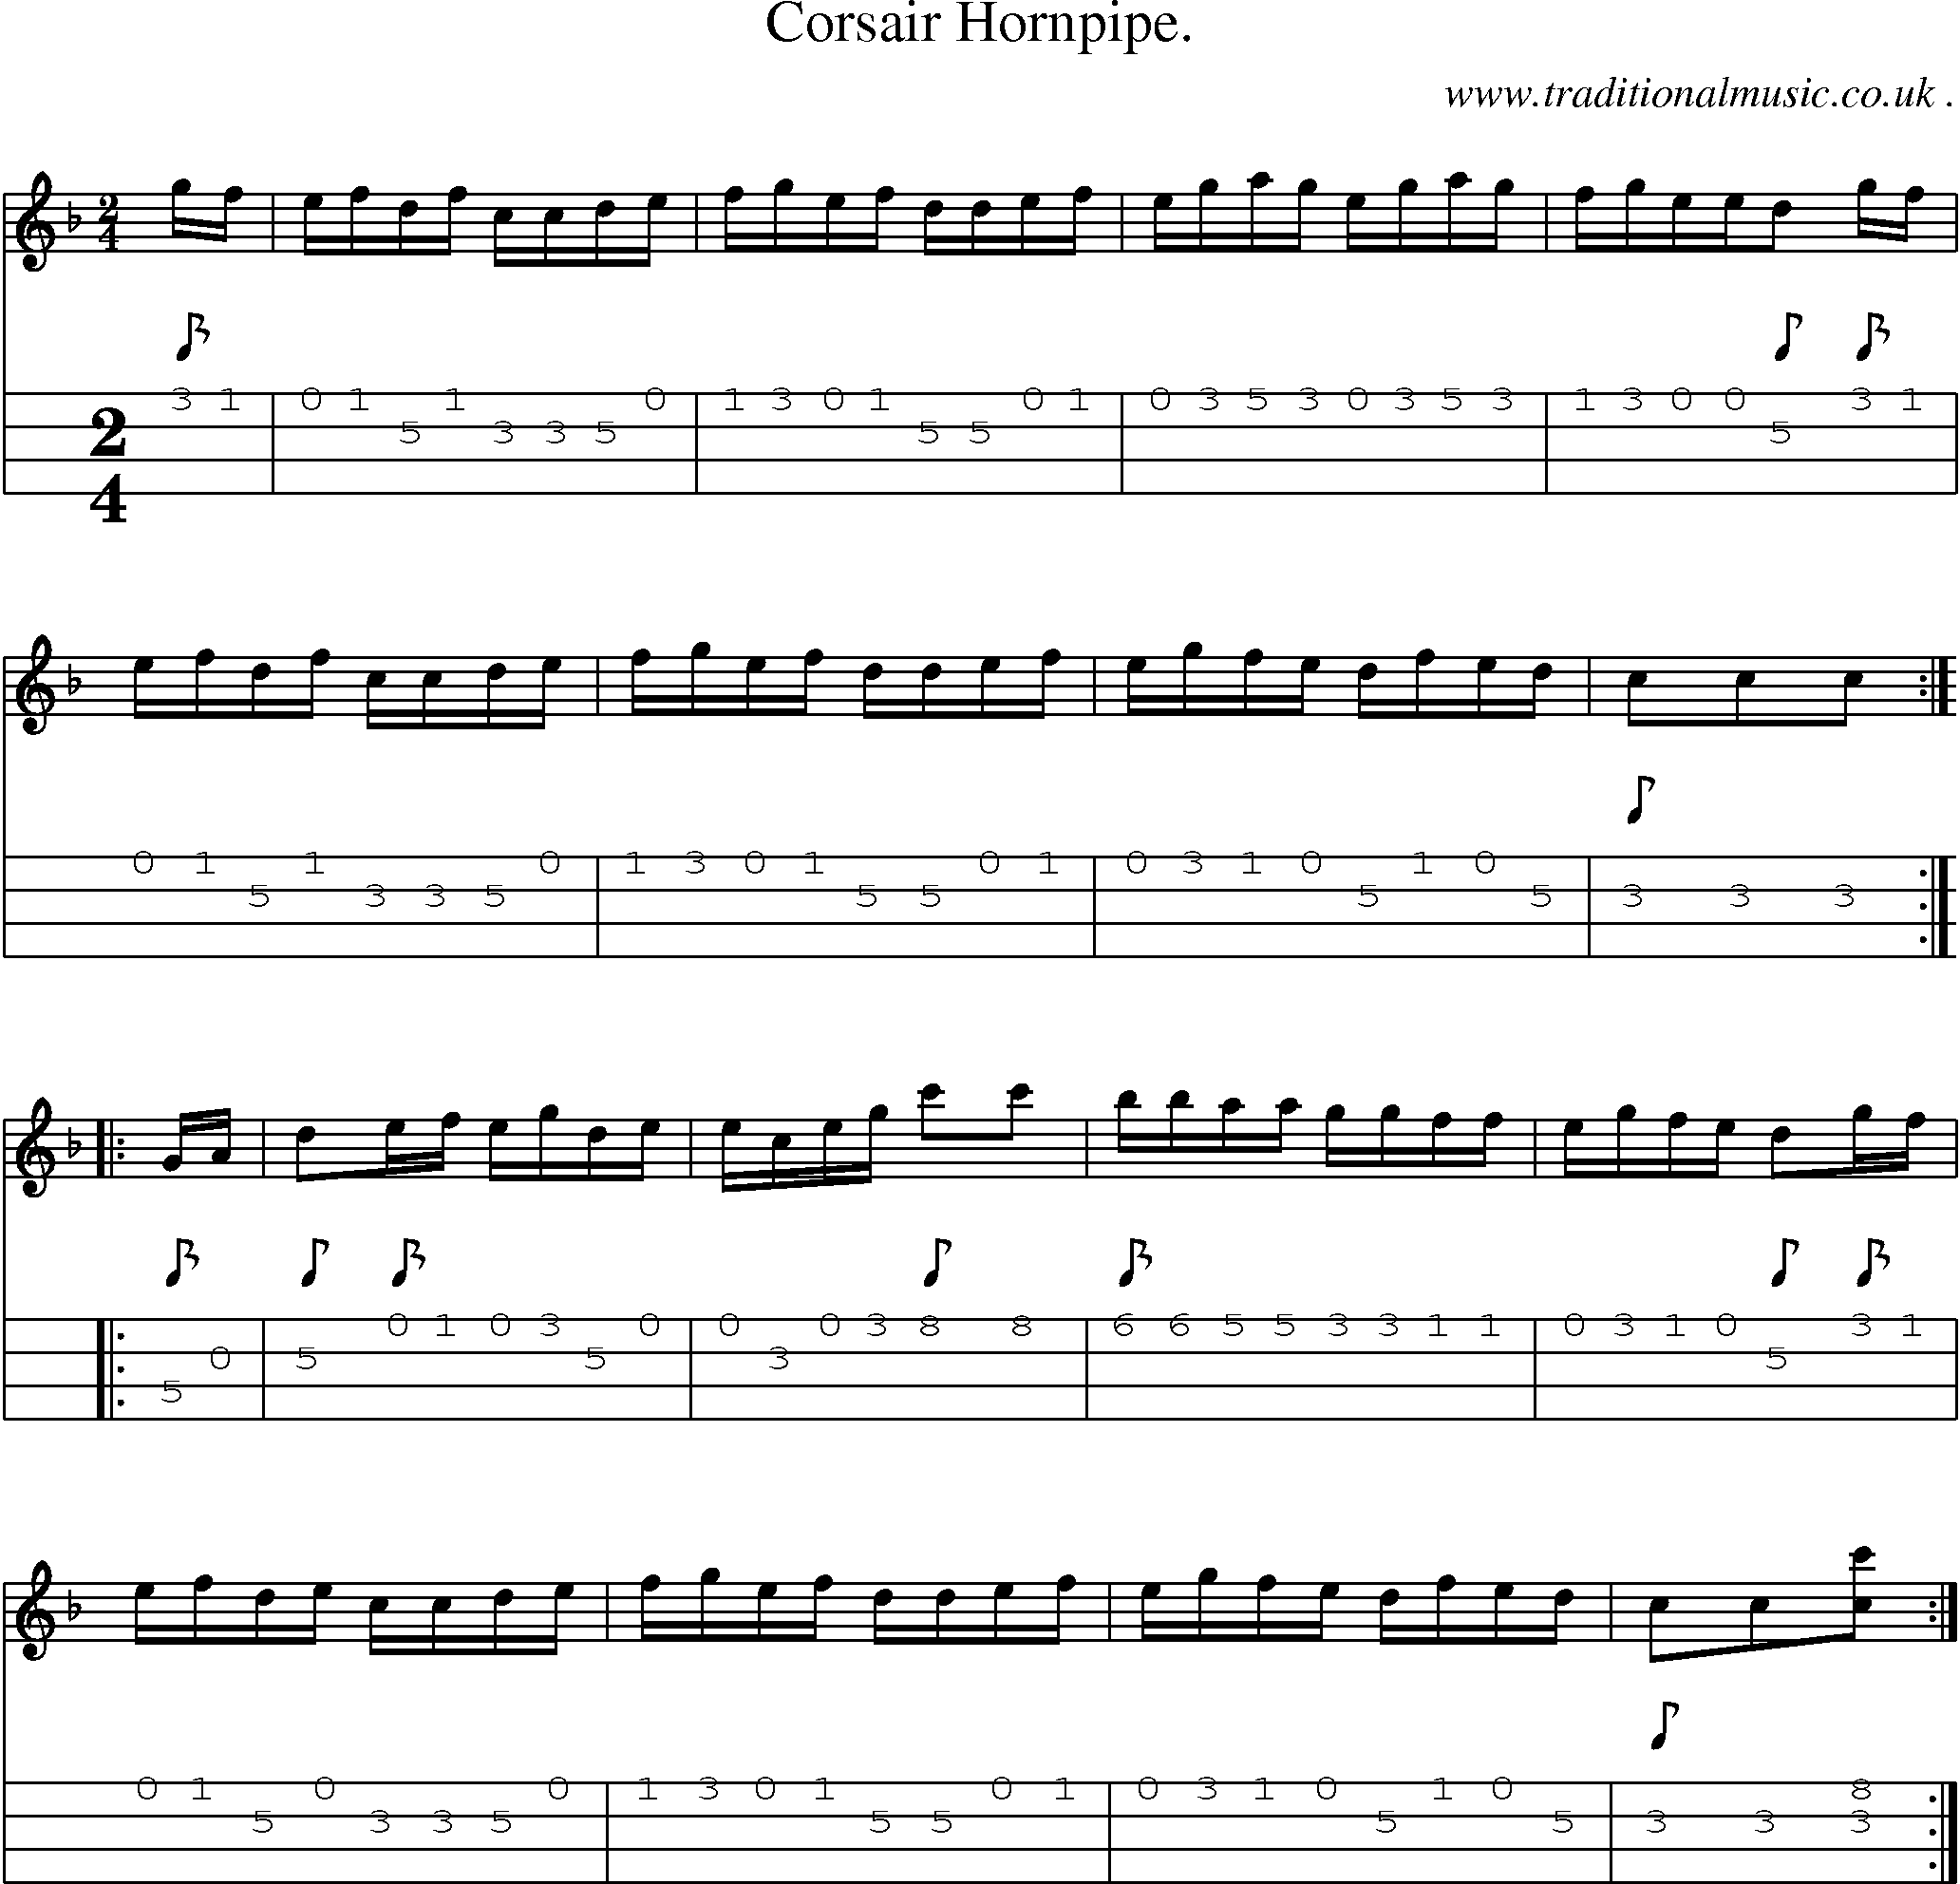 Sheet-Music and Mandolin Tabs for Corsair Hornpipe